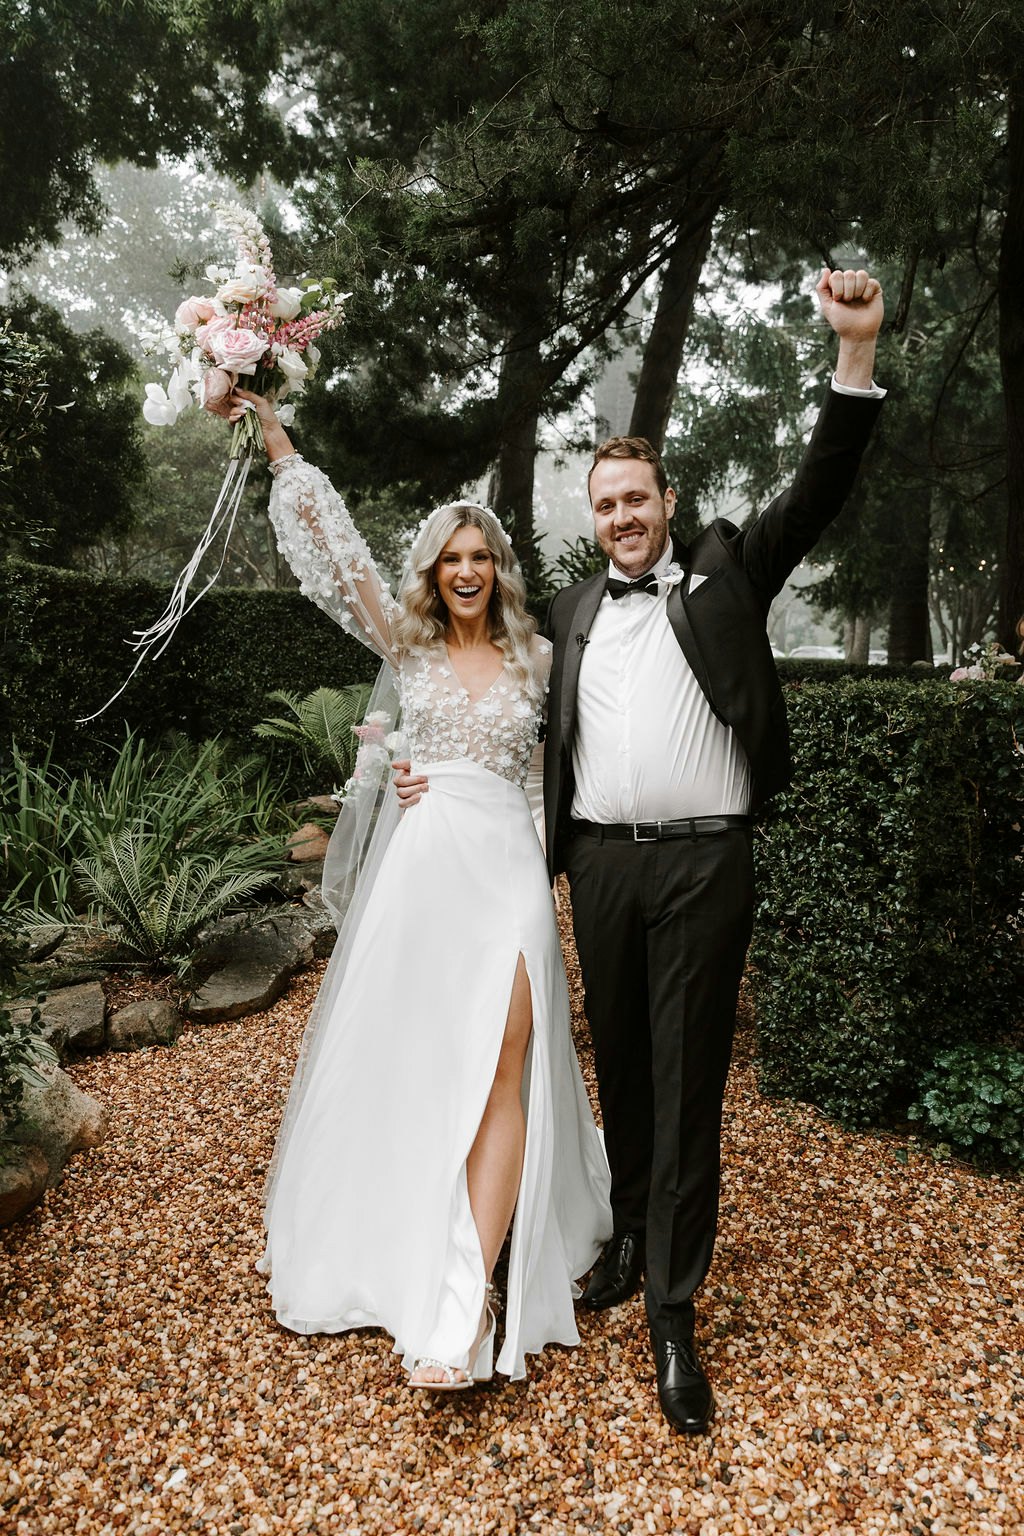 Bride and groom celebrating holding bouquet in the air